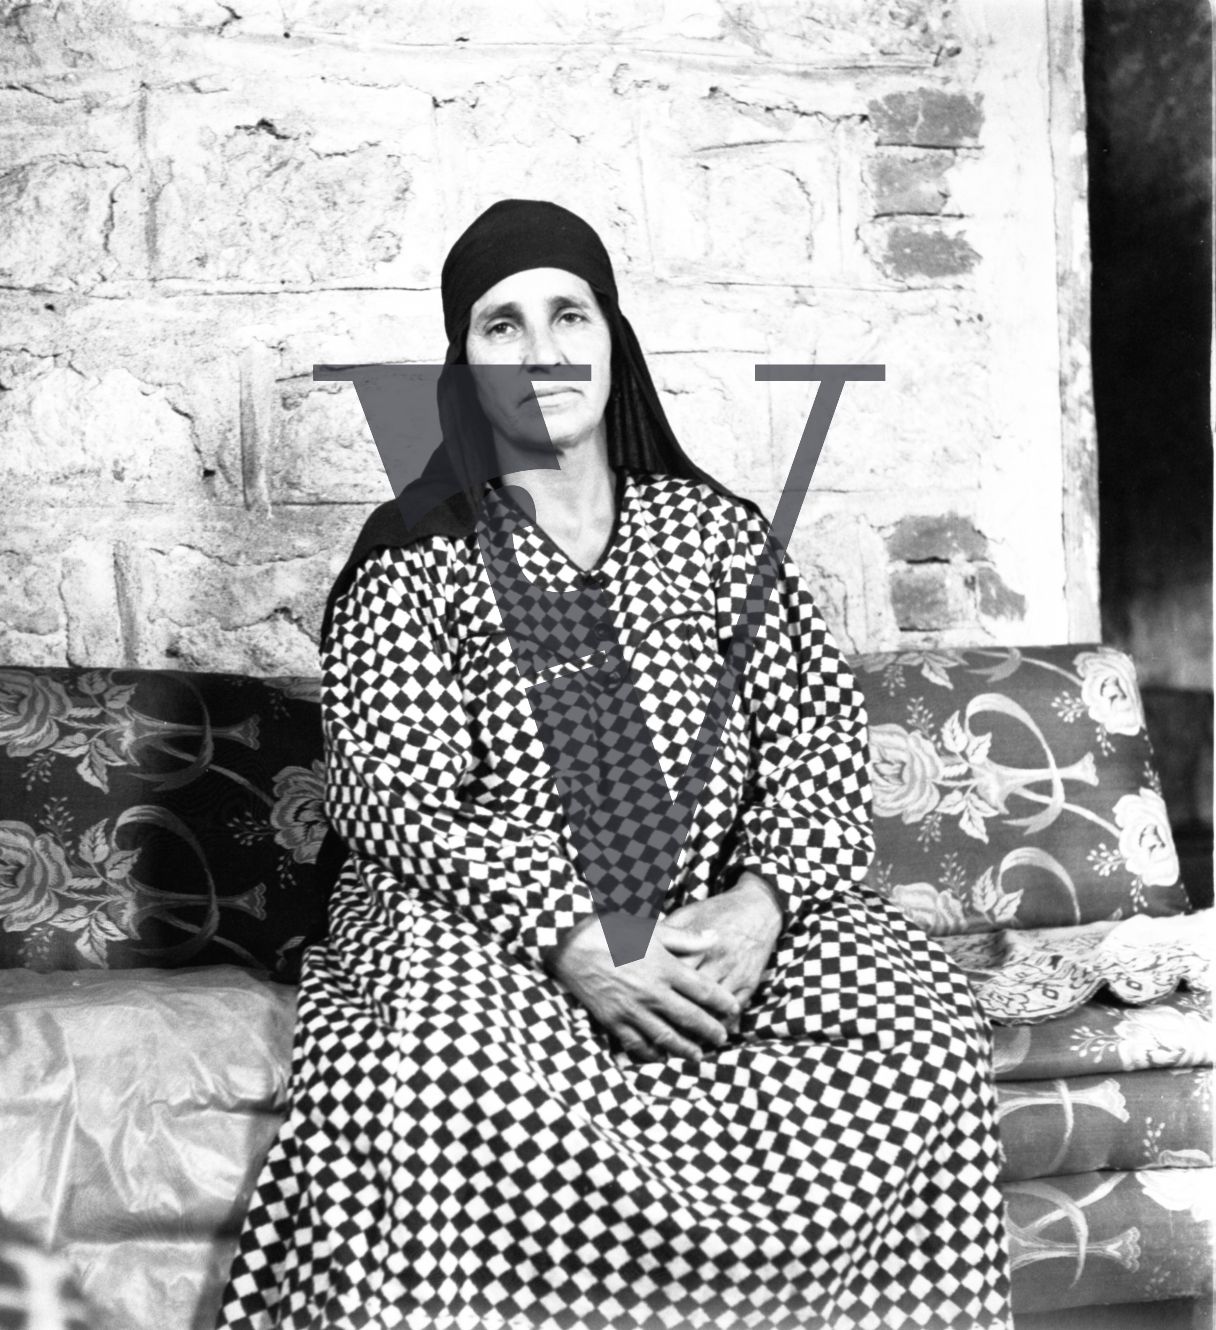 Harrania, Egypt, woman in check dress poses for camera.